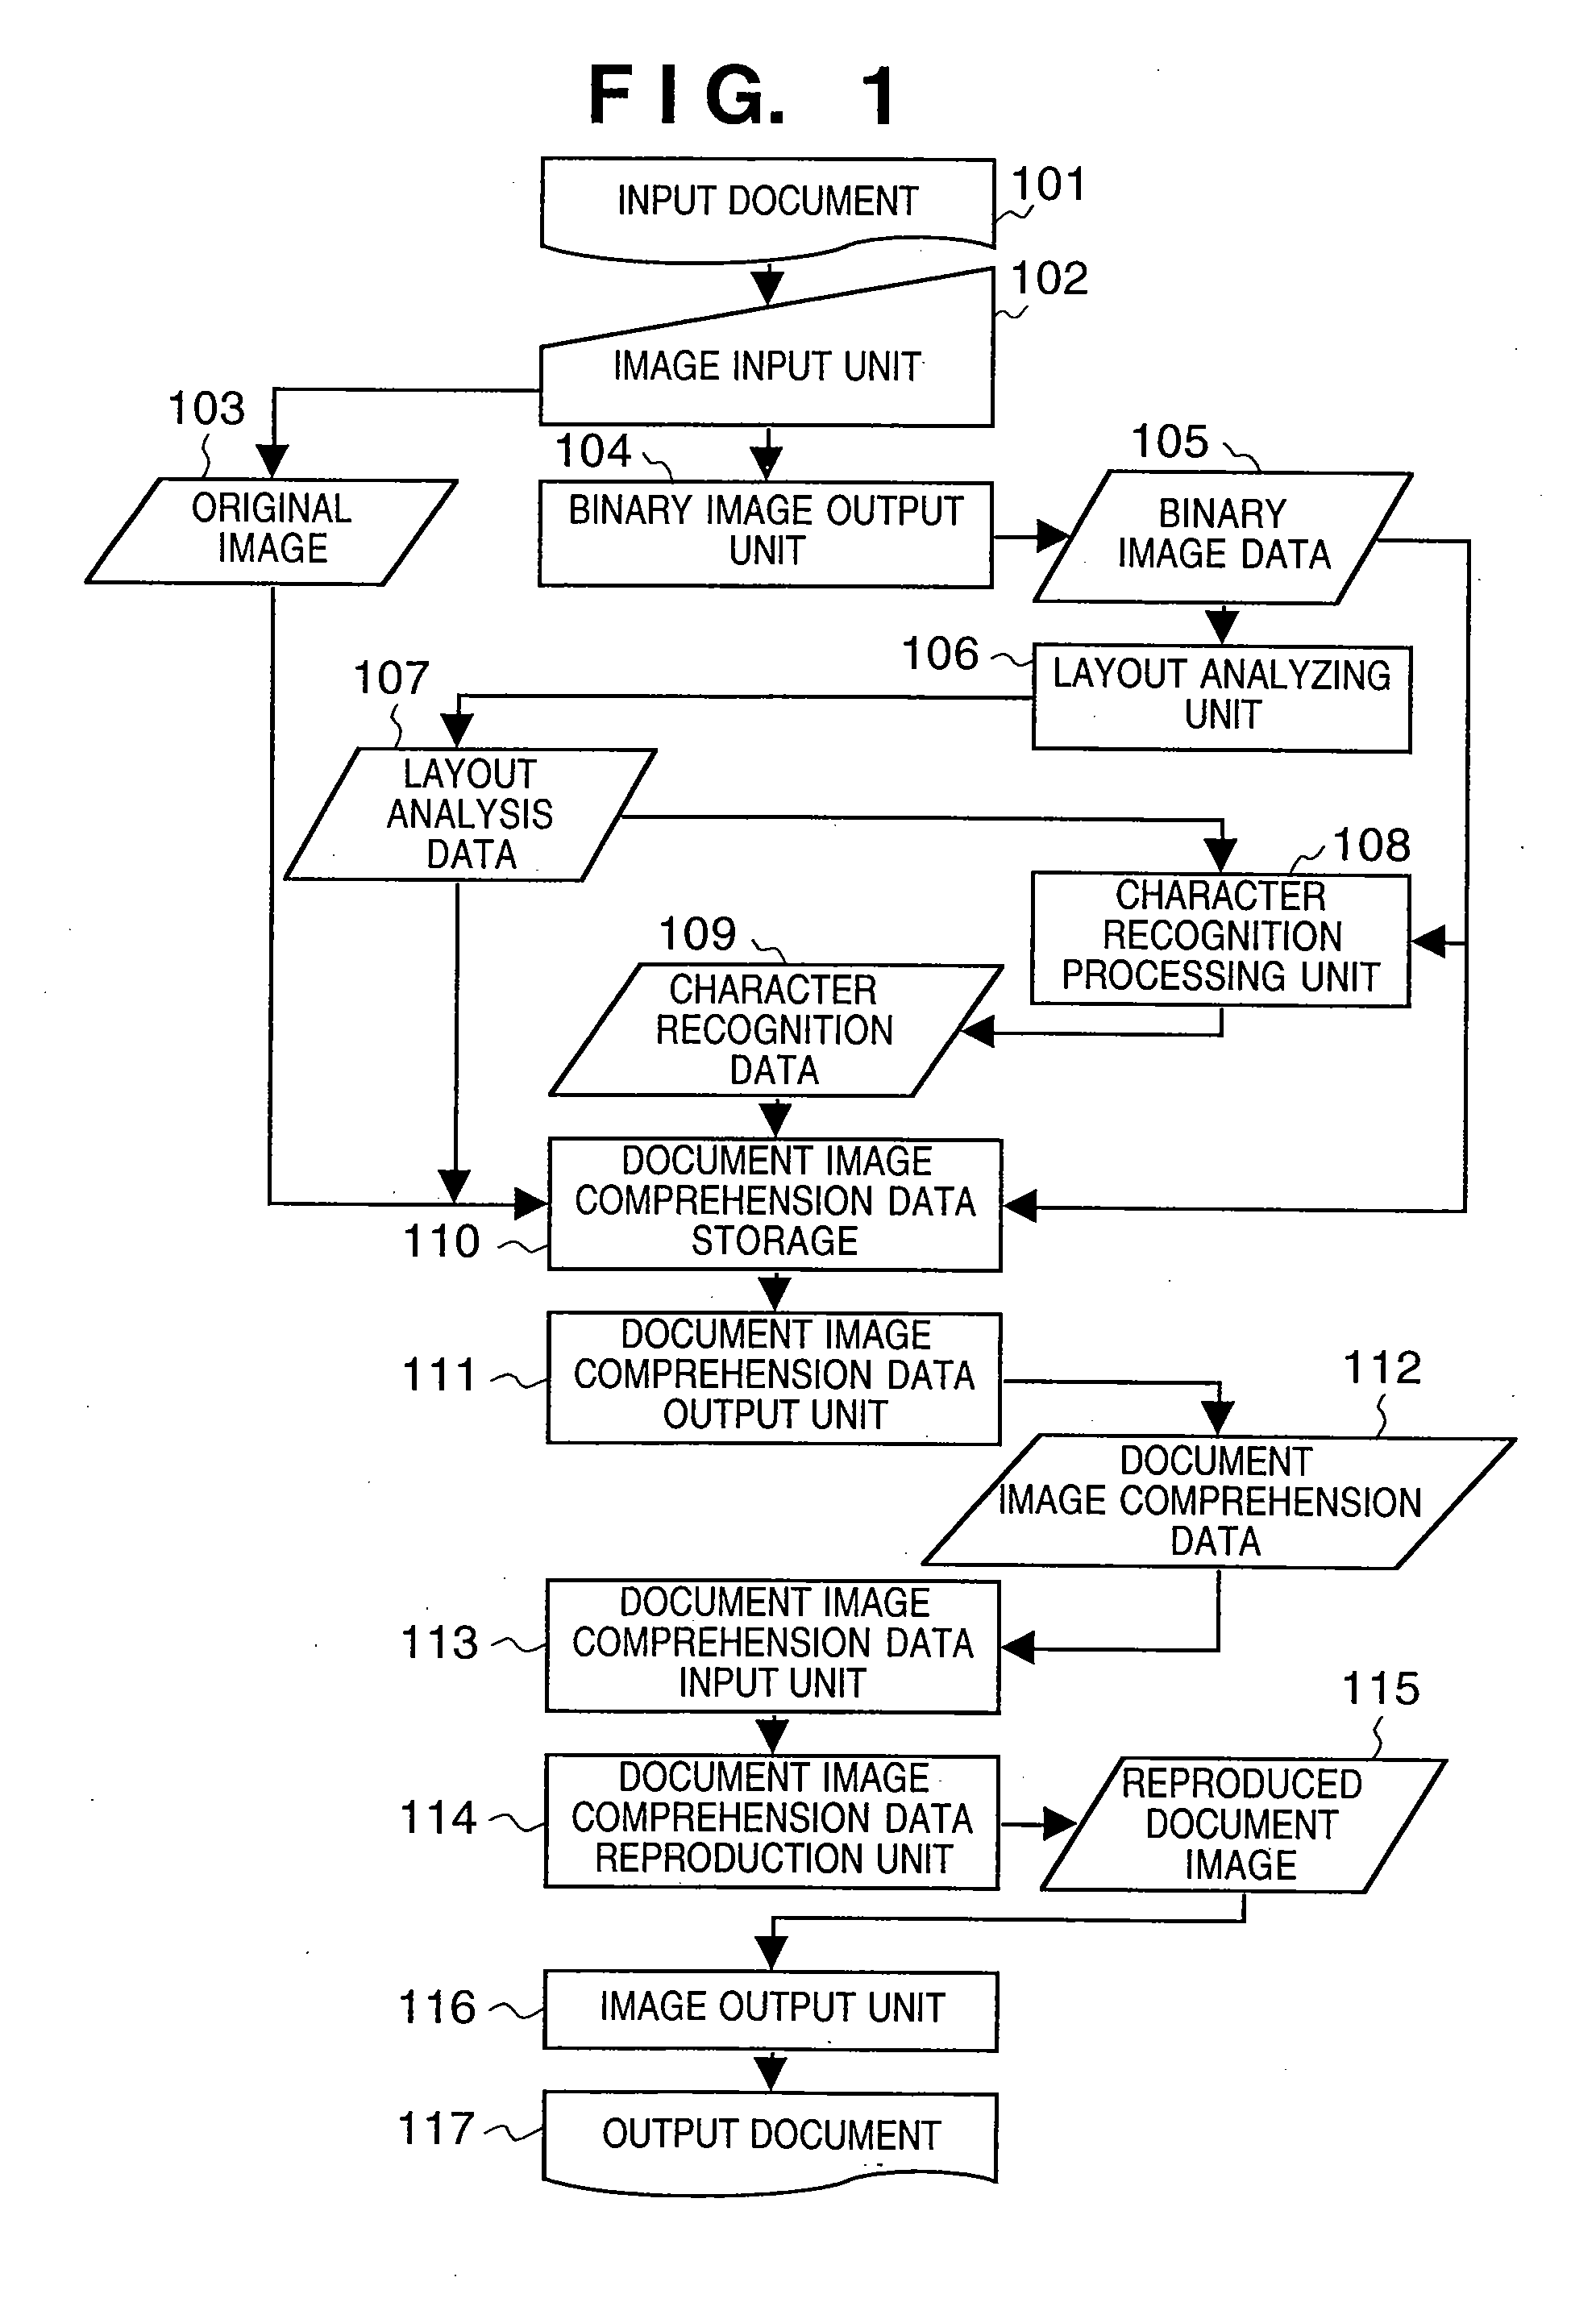 Image processing apparatus, image reproduction apparatus, system, method and storage medium for image processing and image reproduction